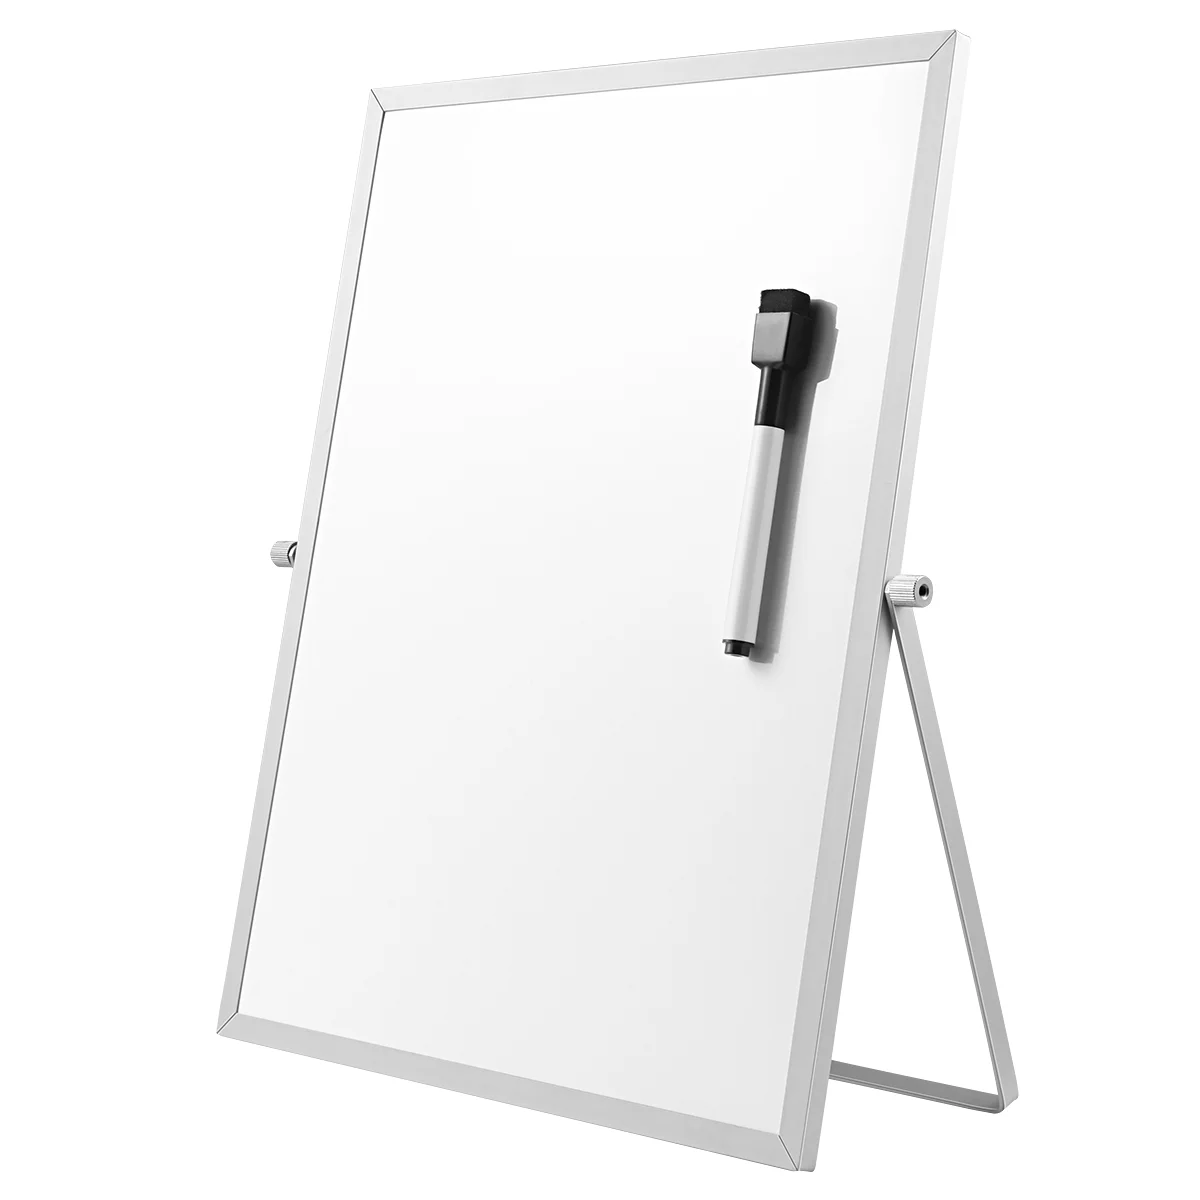 

Board Dry Erase Whiteboard White Double Sided Planner Desktop Personal Mini Wall Boards Kids Stand Clipboards Portable Easel